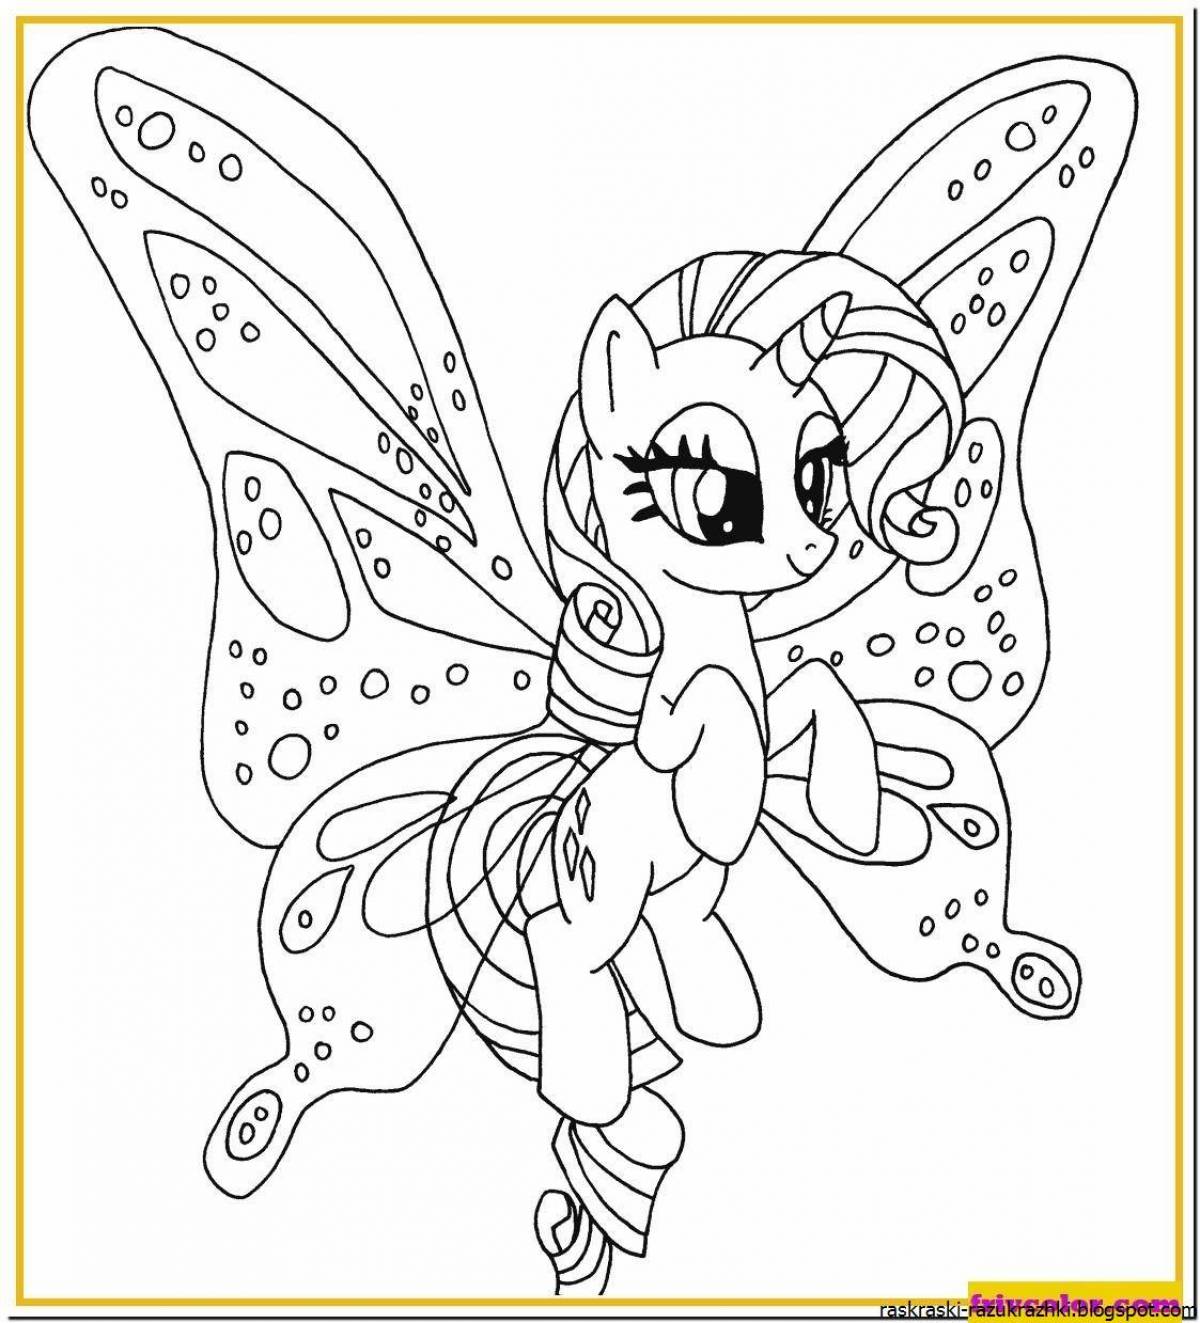 Cute pony coloring for children 5-6 years old